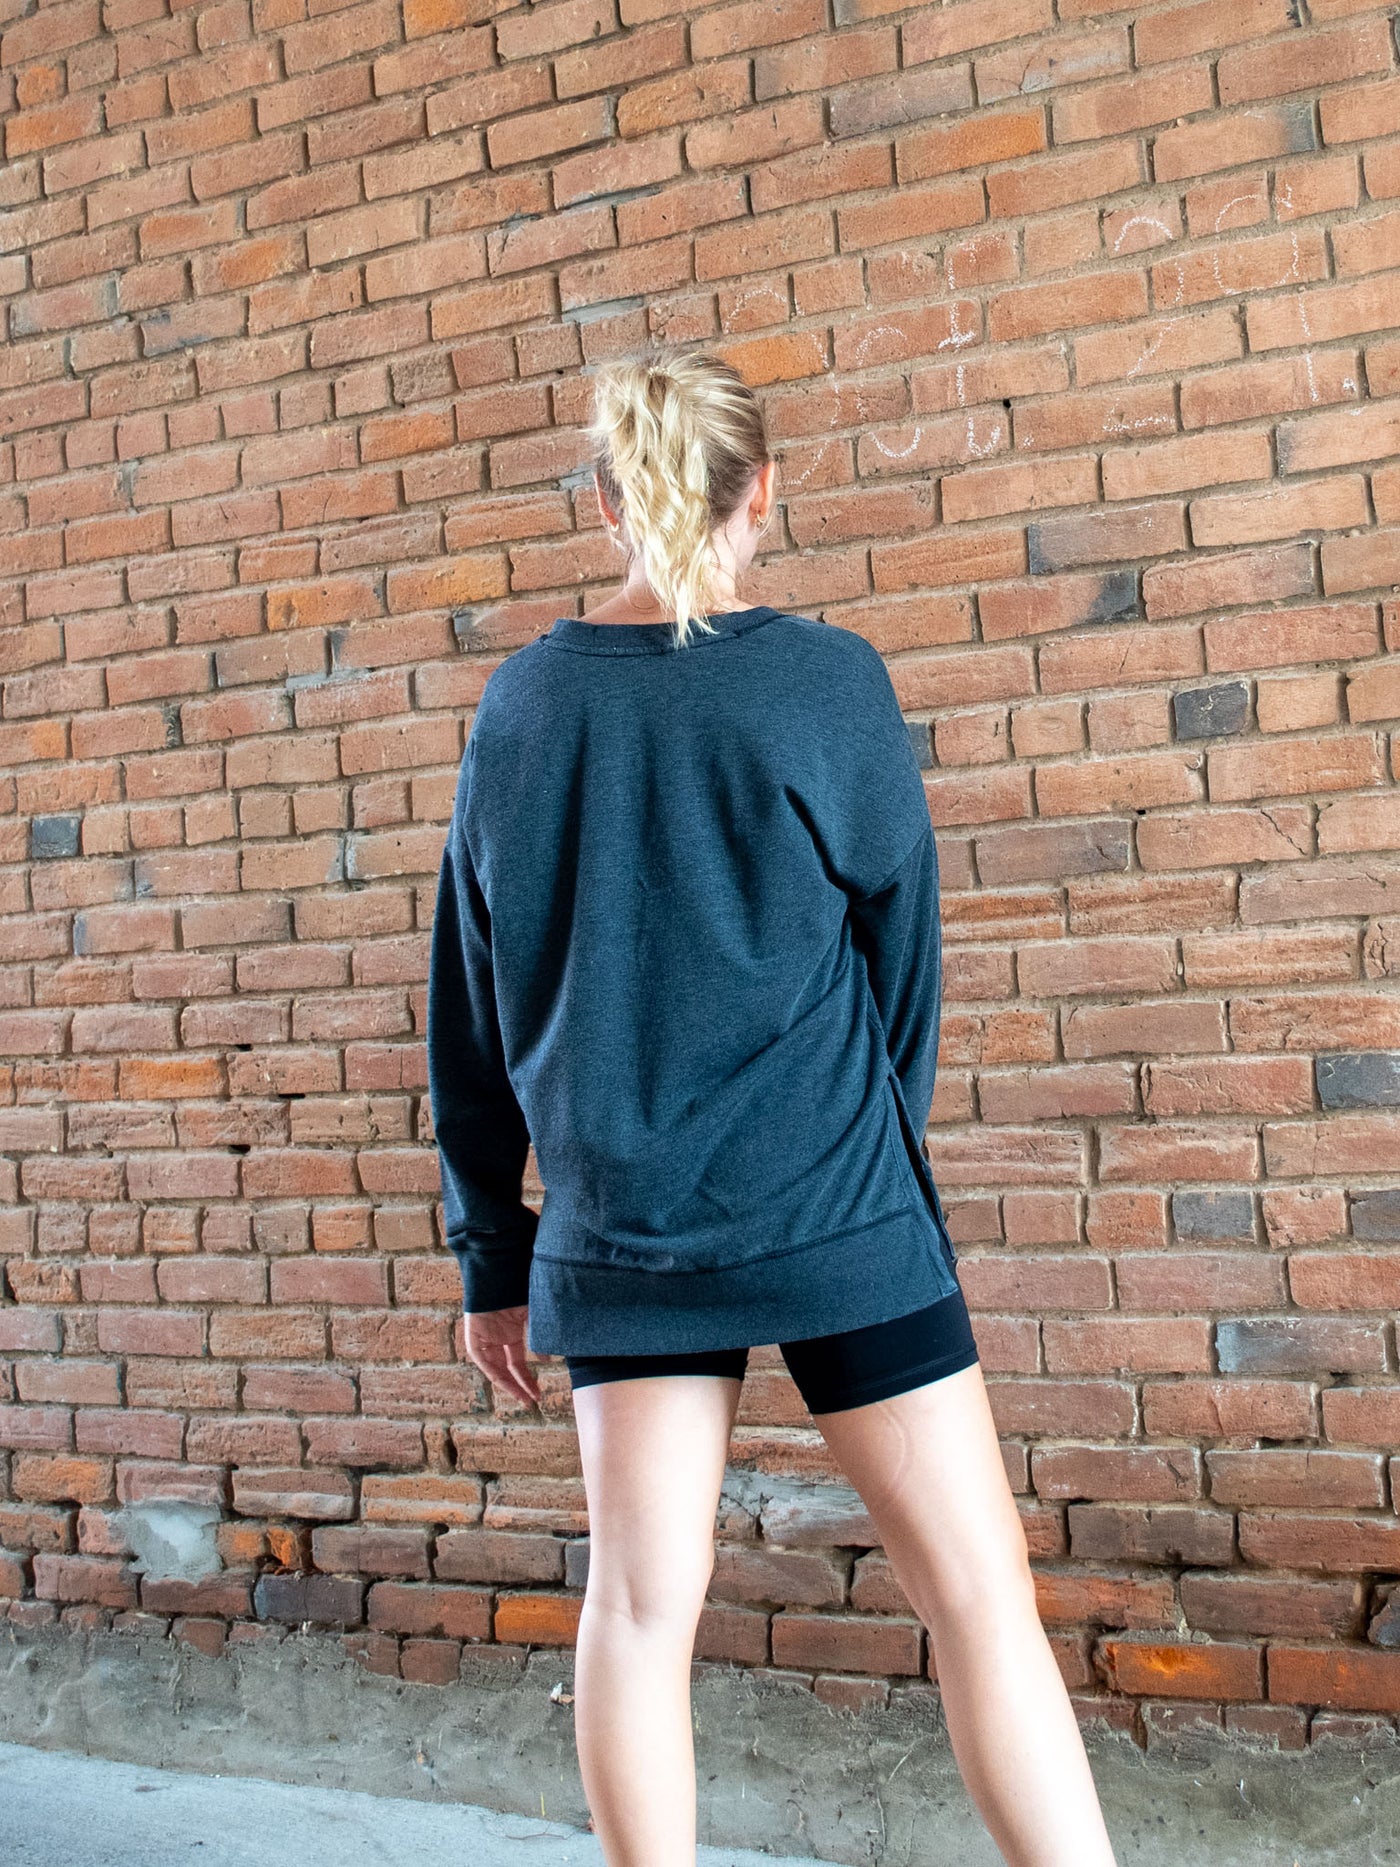 A model wearing a gray v-neck sweatshirt with an oversized look and thick hemline. The model has it paired with black biker shorts.